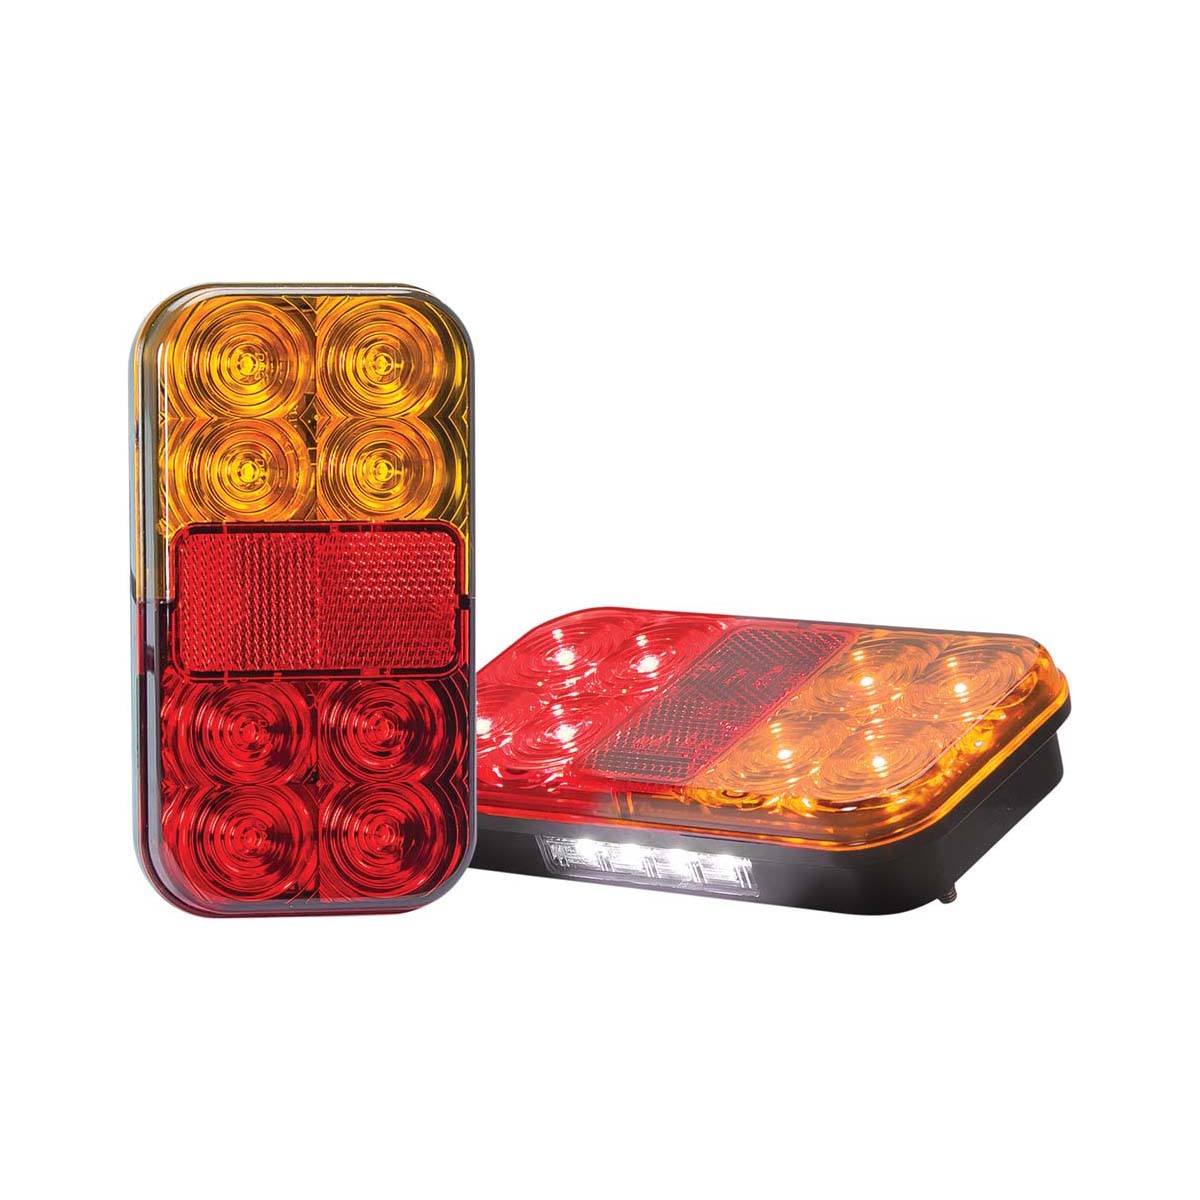 LED Autolamps 149 Series Trailer Lights